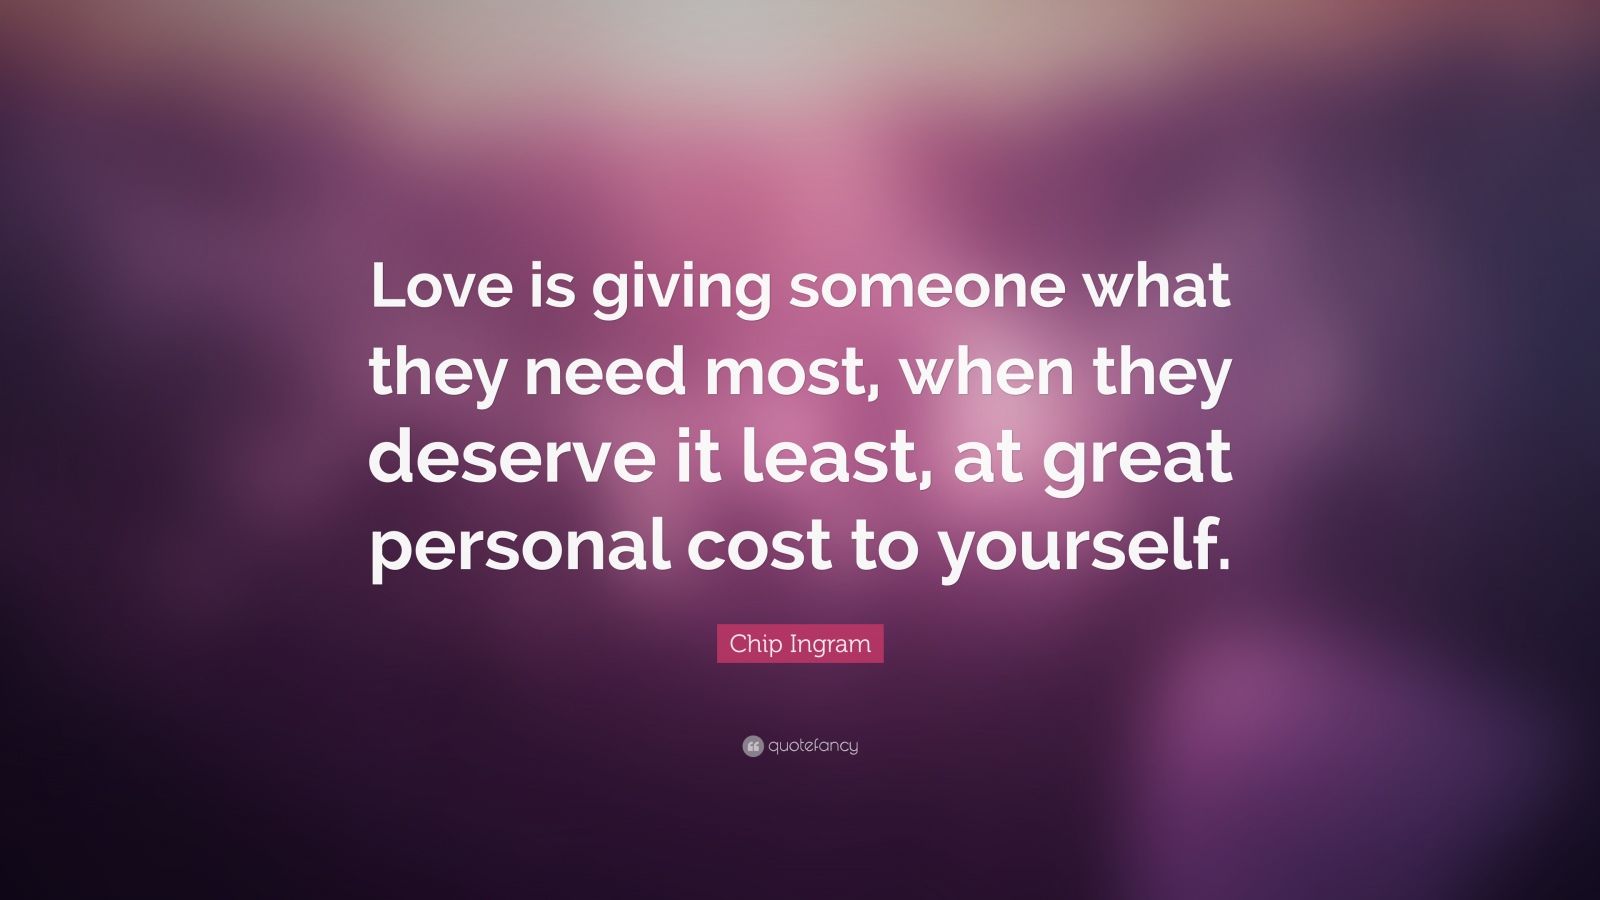 Chip Ingram Quote: “Love is giving someone what they need most, when ...